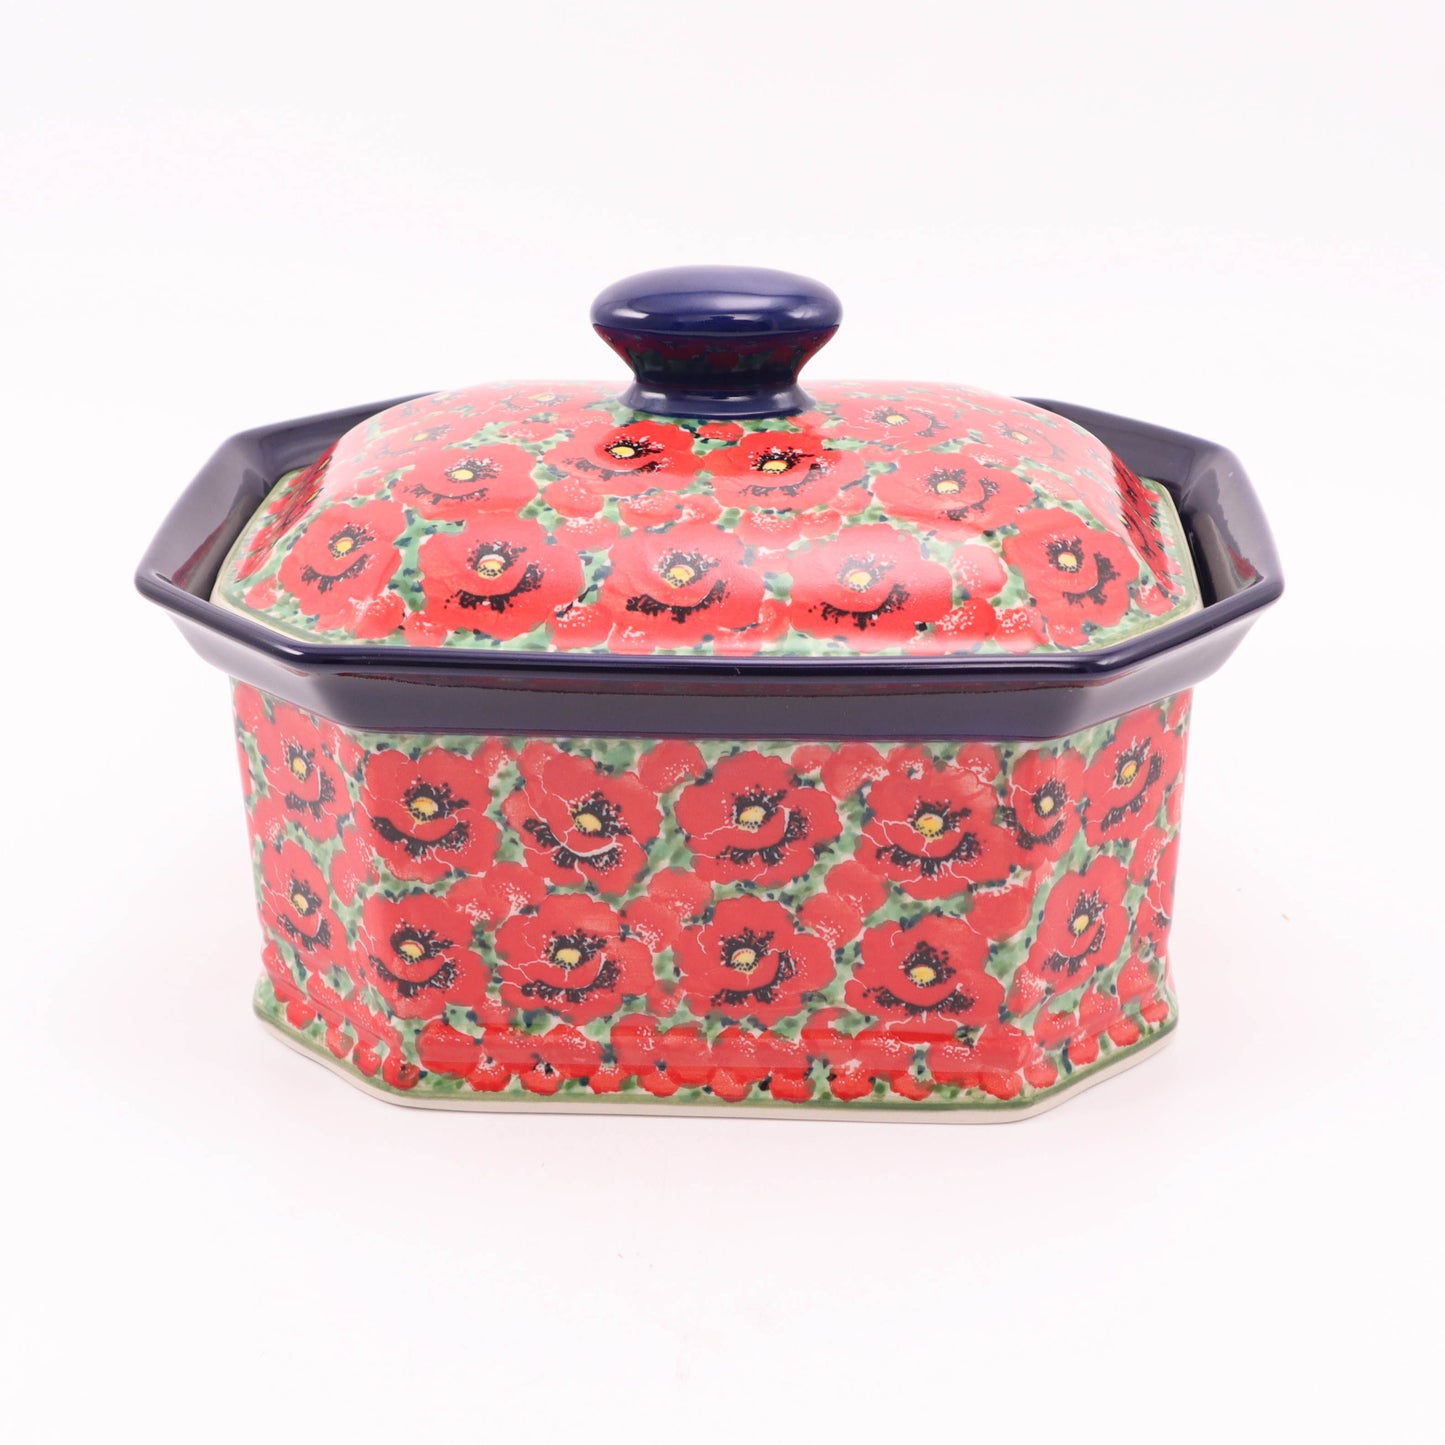 10"x8"x6" Container with Lid. Pattern: Scarlett Surroundings